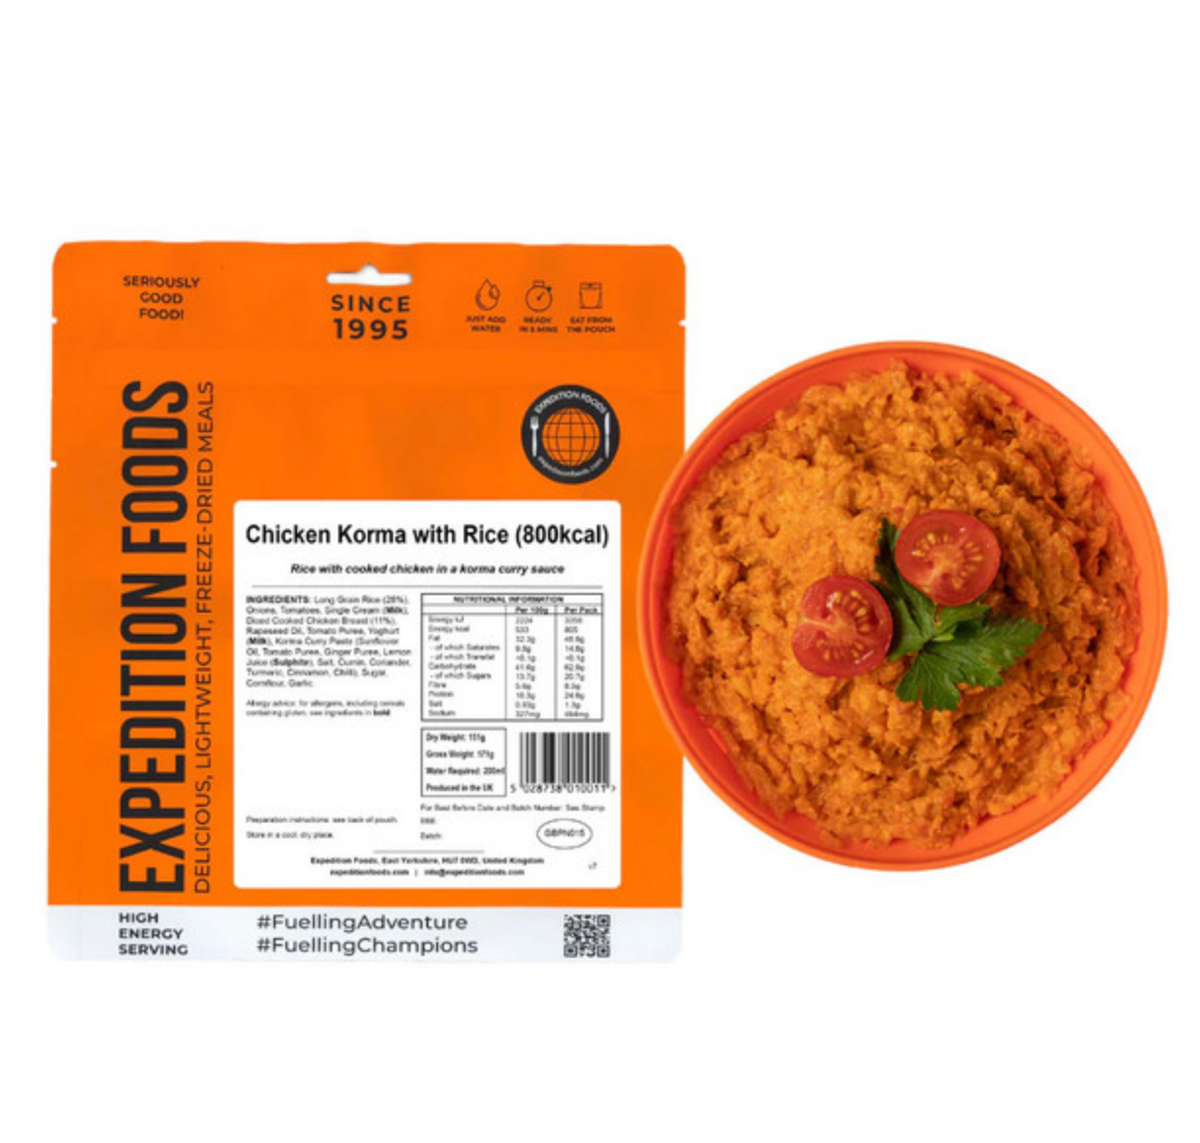 Expedition Foods Chicken Korma with Rice 800KCAL